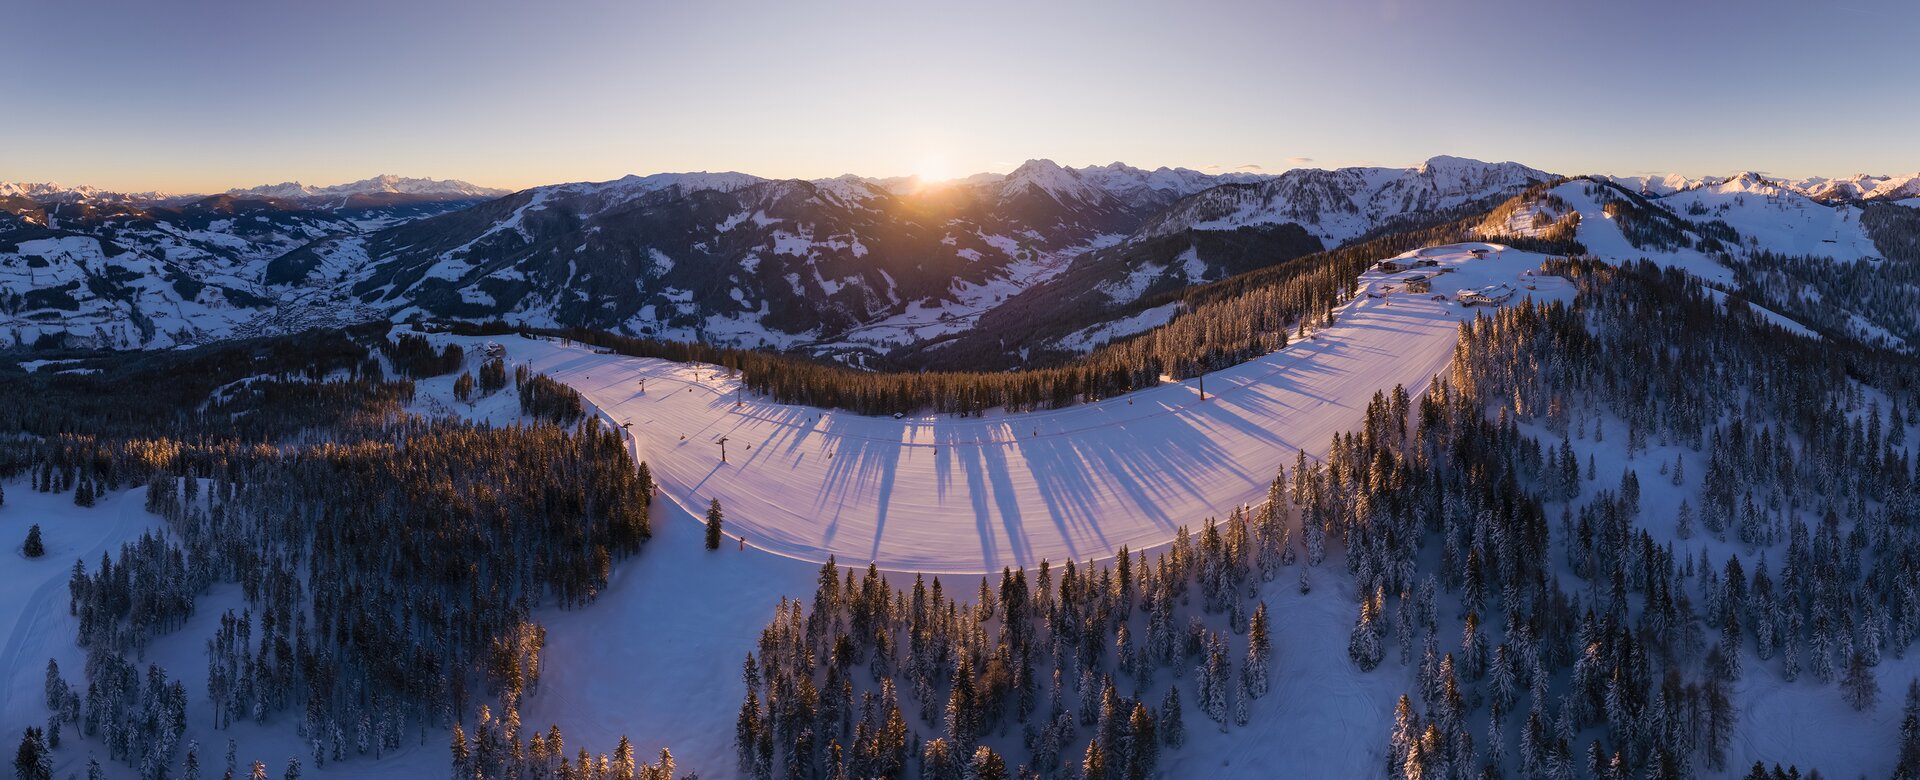 Panorama picture of a ski mountain and behind the surrounding snow-covered mountains the sun is just rising | © Snow Space Salzburg